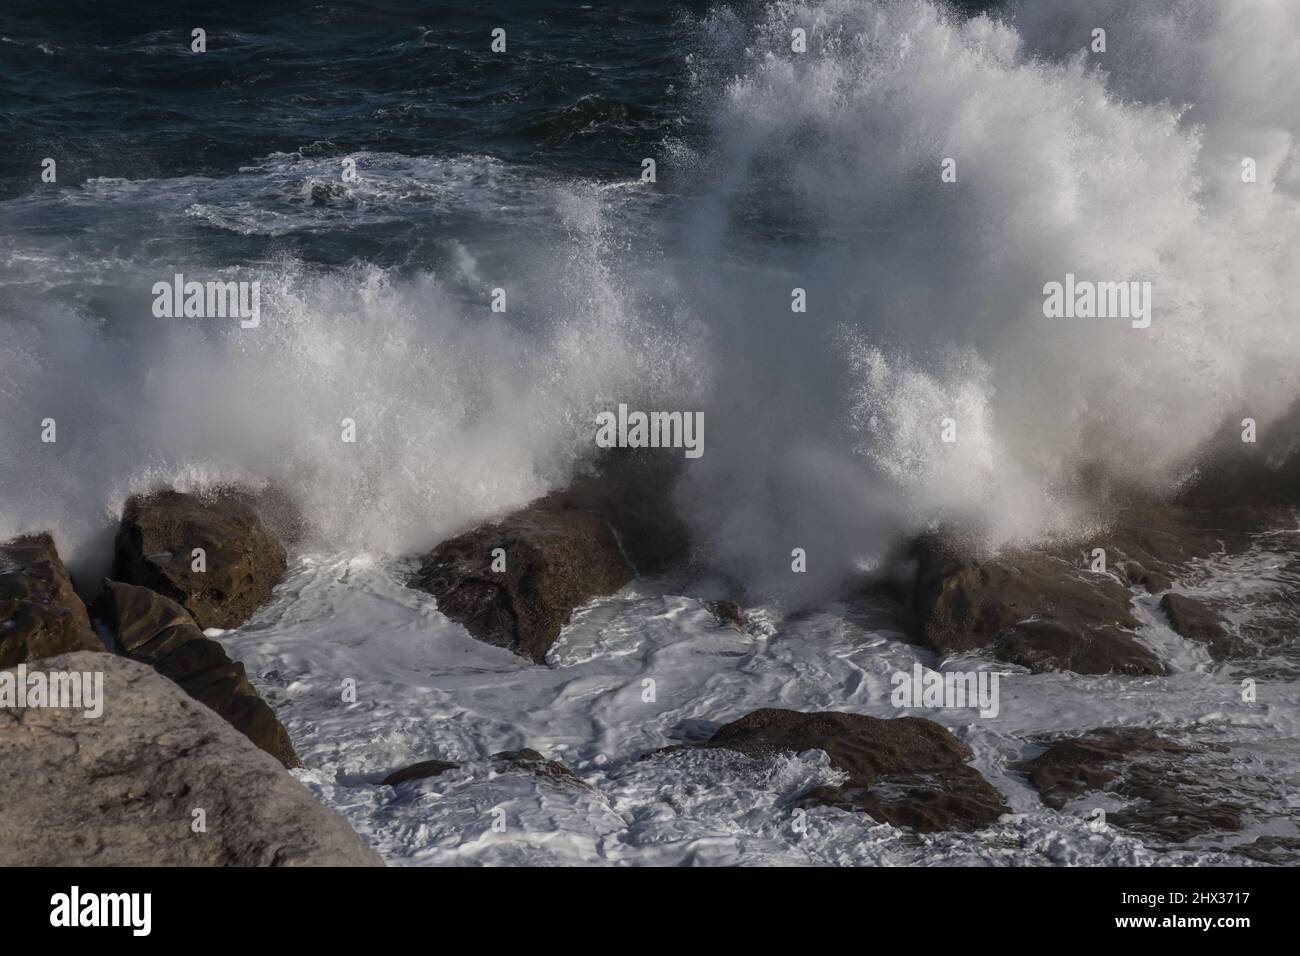 Sydney, Australia, Wednesday 9th March 2022 .Big waves hit Rocks at Ben Buckler Point, North Bondi as the storms and floods finally ease, and the sun comes out. Credit Paul Lovelace/Alamy Live News Stock Photo